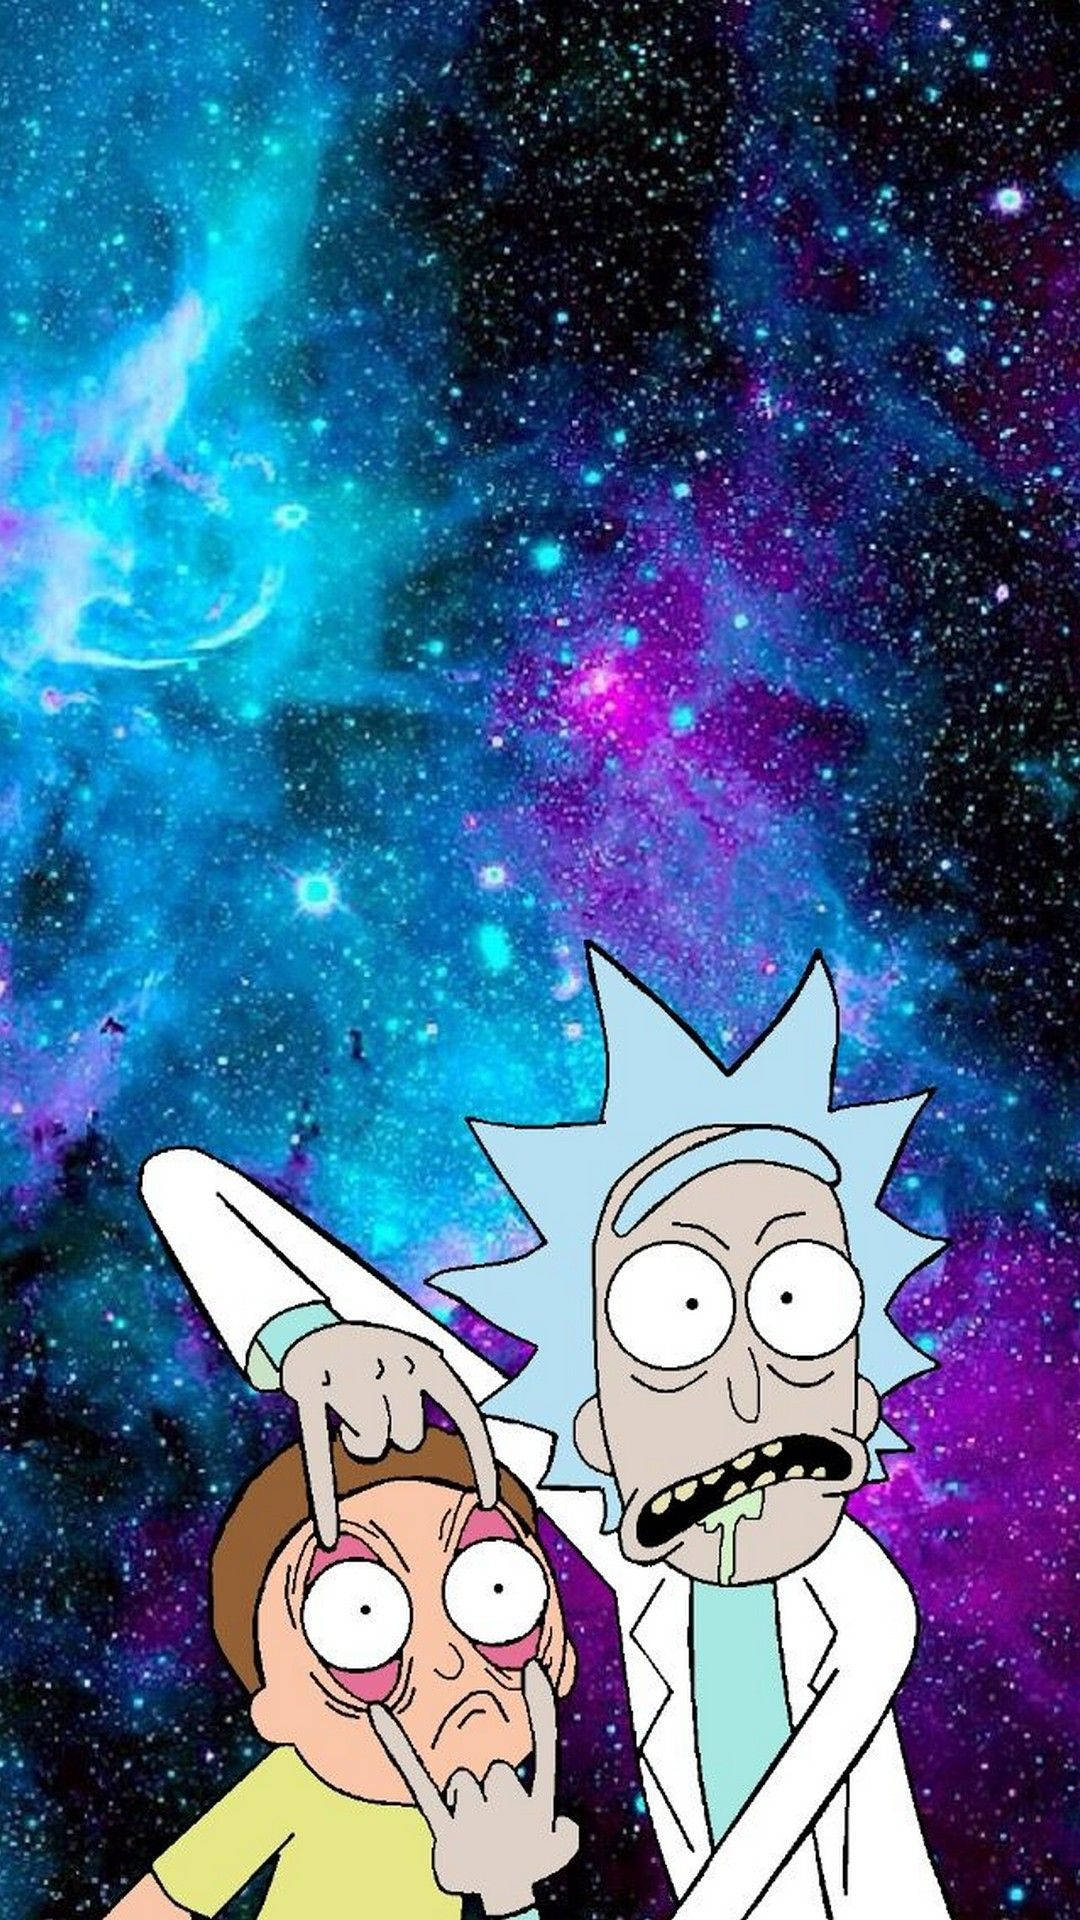 Rick and Morty Mobile Wallpaper - 2023 Movie Poster Wallpaper HD in 2023